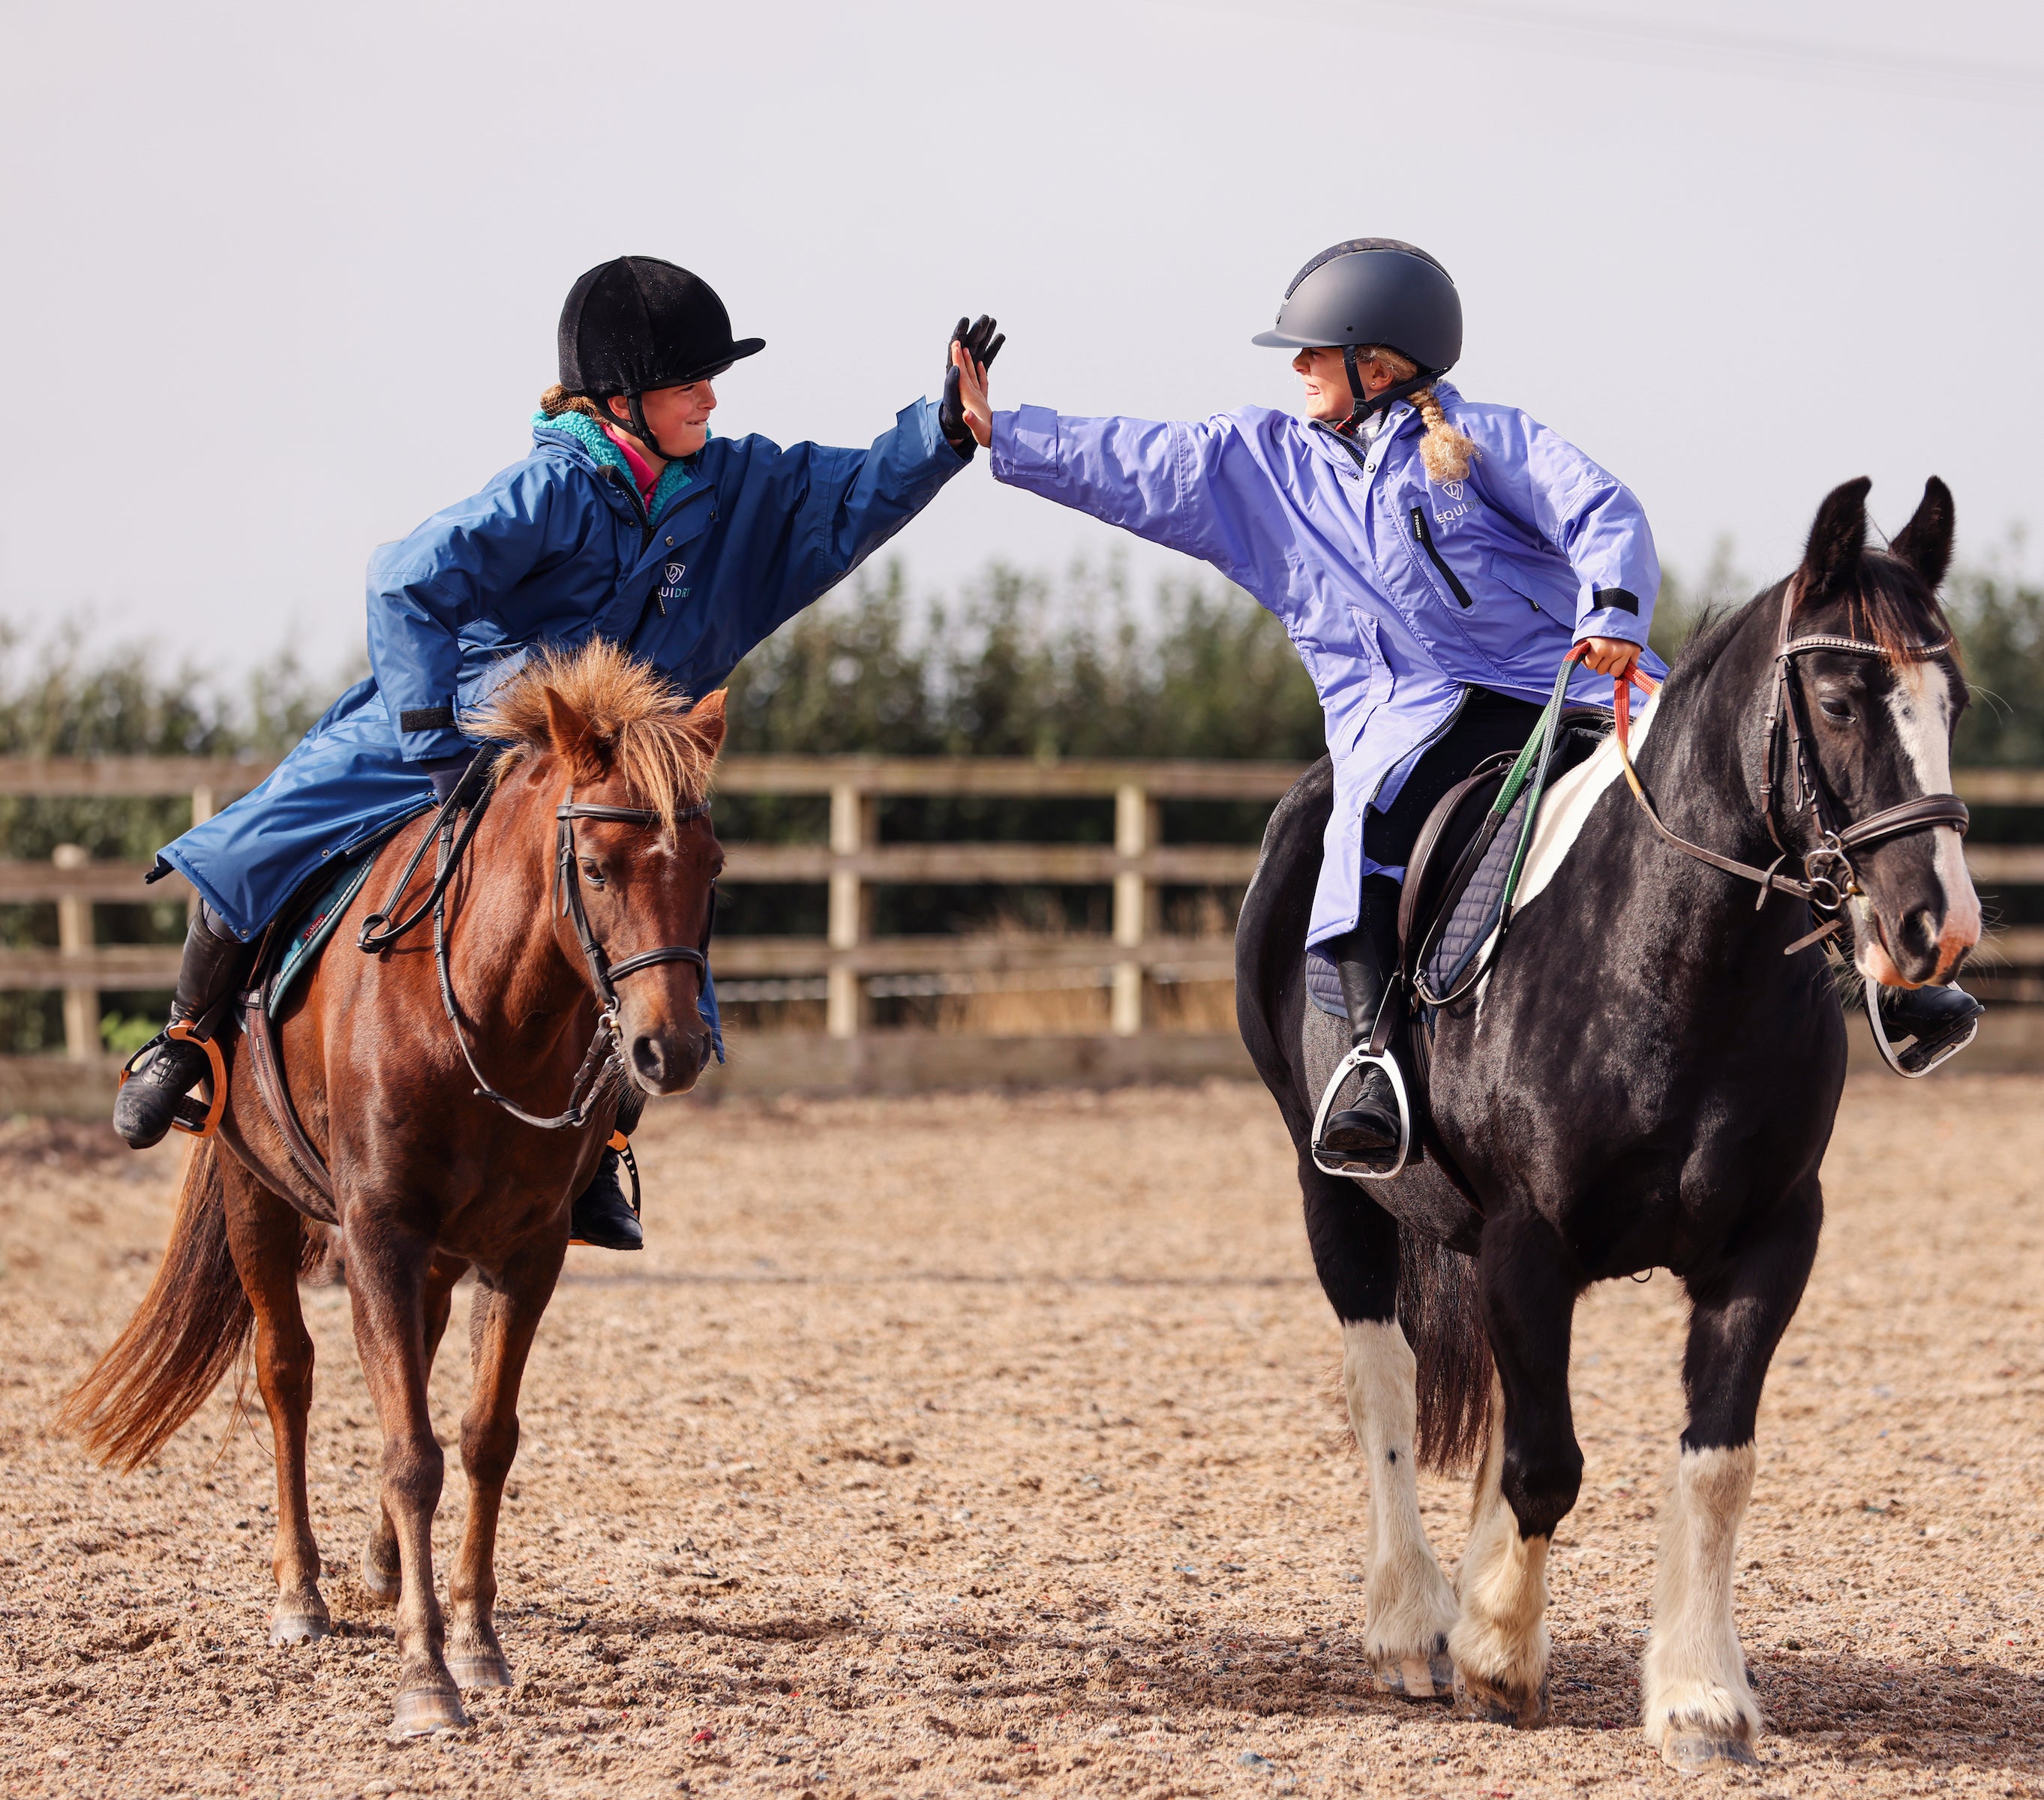 Equestrian Riding Coats - Check out the range from Equine Stay Dry